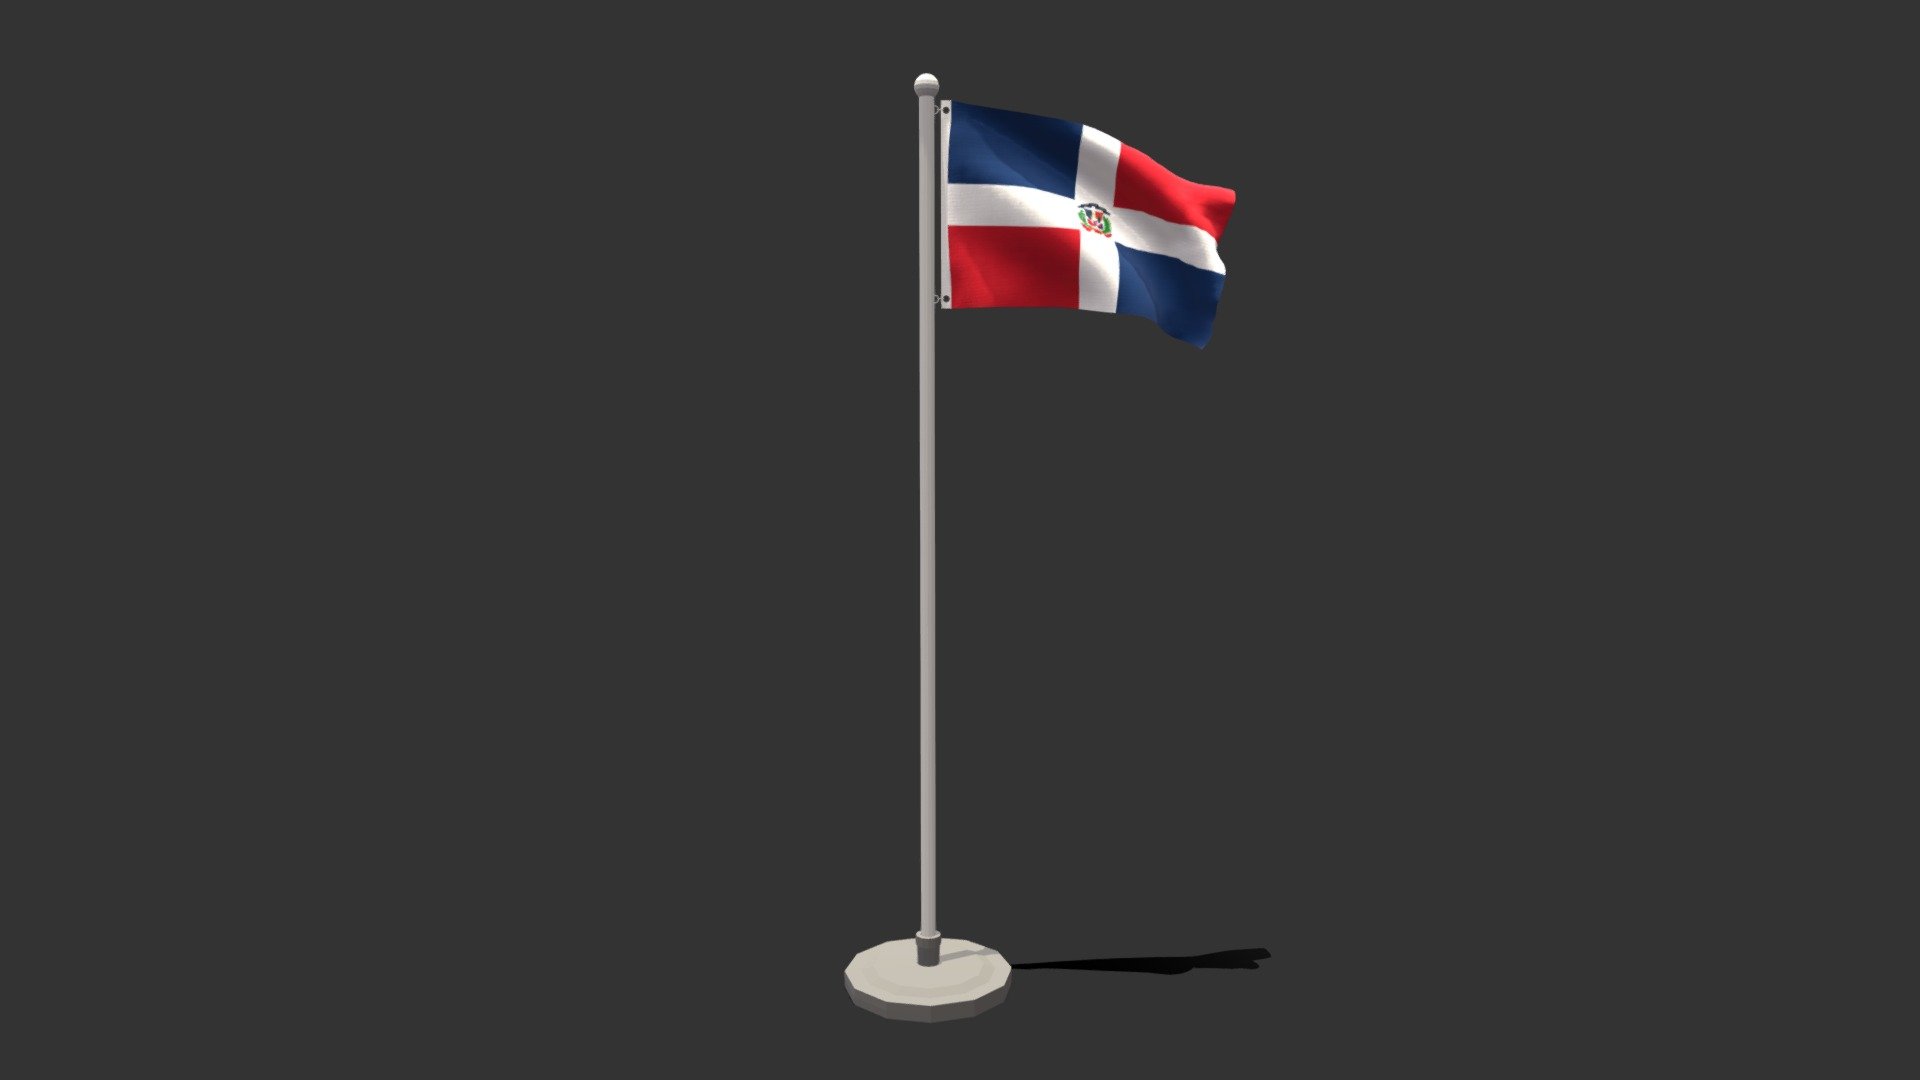 This is a low poly 3D model of an animated flag of Dominican Republic. The low poly flag was modeled and prepared for low-poly style renderings, background, general CG visualization presented as 2 meshes with quads only.

Verts : 1.416 Faces : 1.343.

1024x1024 textures included. Diffuse, roughness and normal maps available only for flag. The pole have simple materials with colors.

The animation is based on shapekeys, 248 frames and seamless, no rig included.

The original file was created in blender. You will receive a OBJ, FBX, blend, DAE, Stl, gLTF, abc.

****PLEASE NOTE Animation icluded only in blend, FBX, abc and glTF files.

Warning: Depending on which software package you are using, the exchange formats (.obj , .dae, .fbx) may not match the preview images exactly. Due to the nature of these formats, there may be some textures that have to be loaded by hand and possibly triangulated geometry 3d model